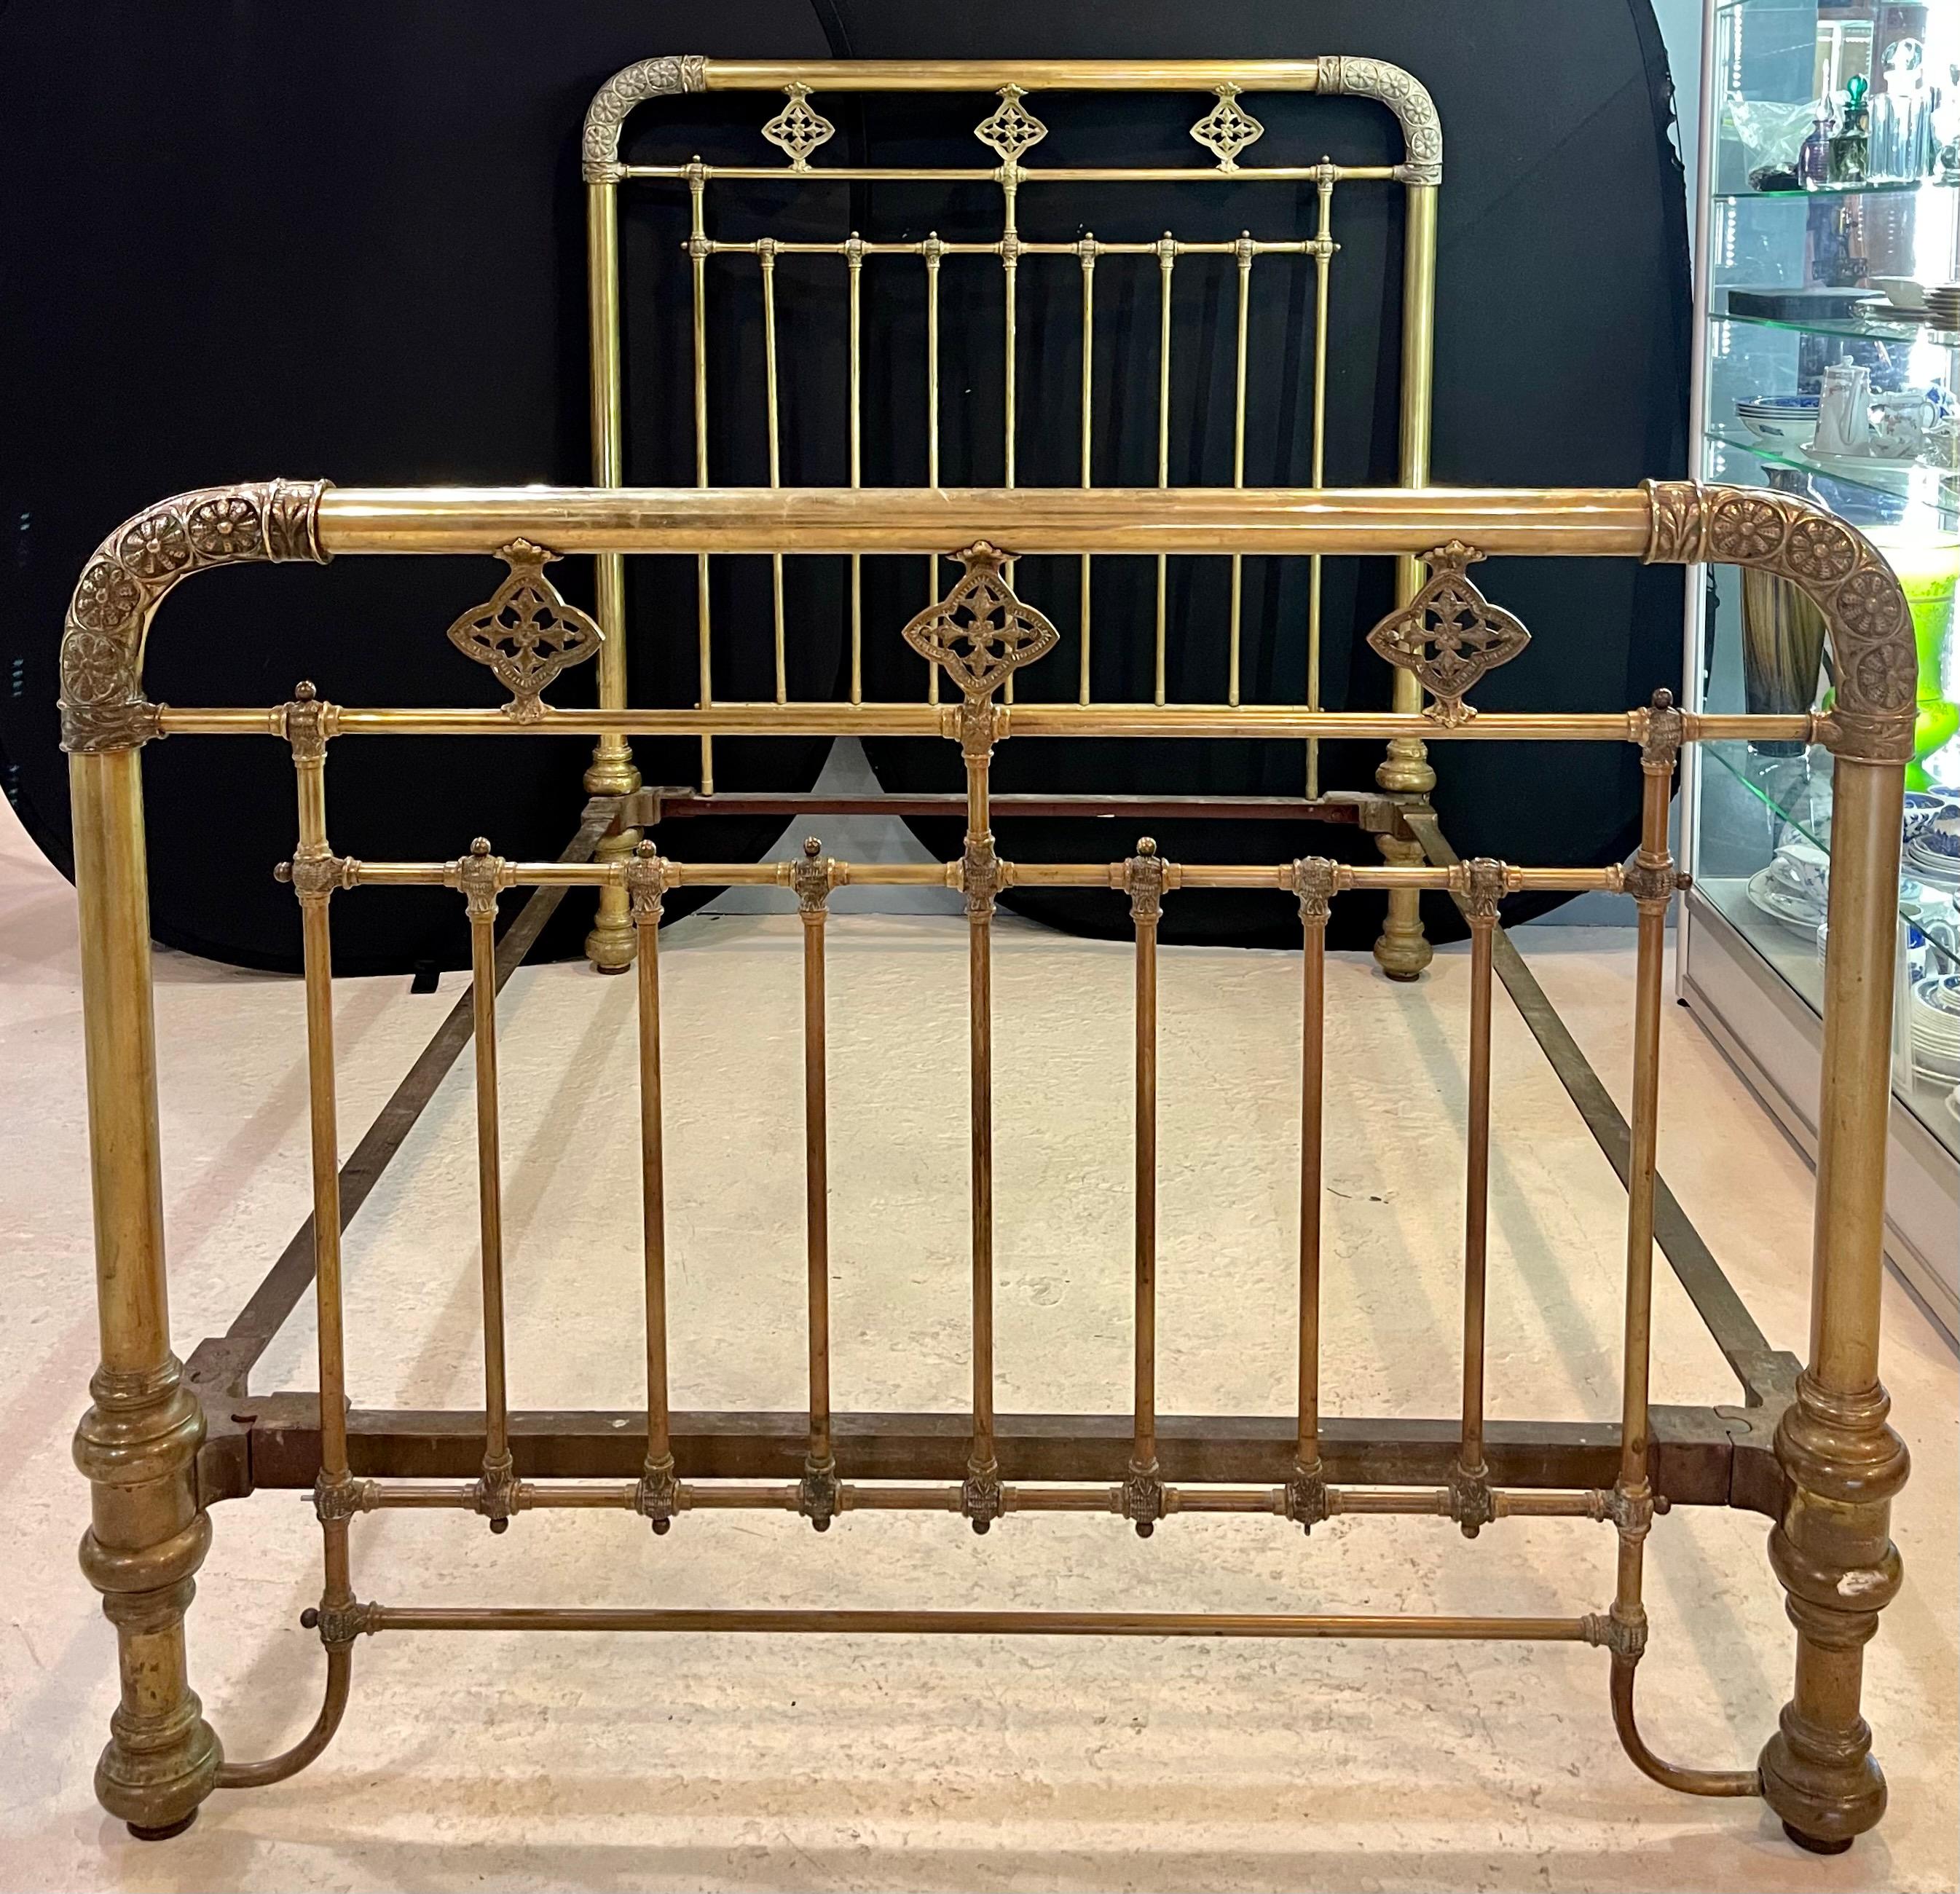 19th-20th century brass bed frame. Full sized early 20th century frame that is strong and sturdy with all the earmarking of fine casting. This wonderfully column decorated frame has detailed corner turns as well as a detailed apron. The frame itself